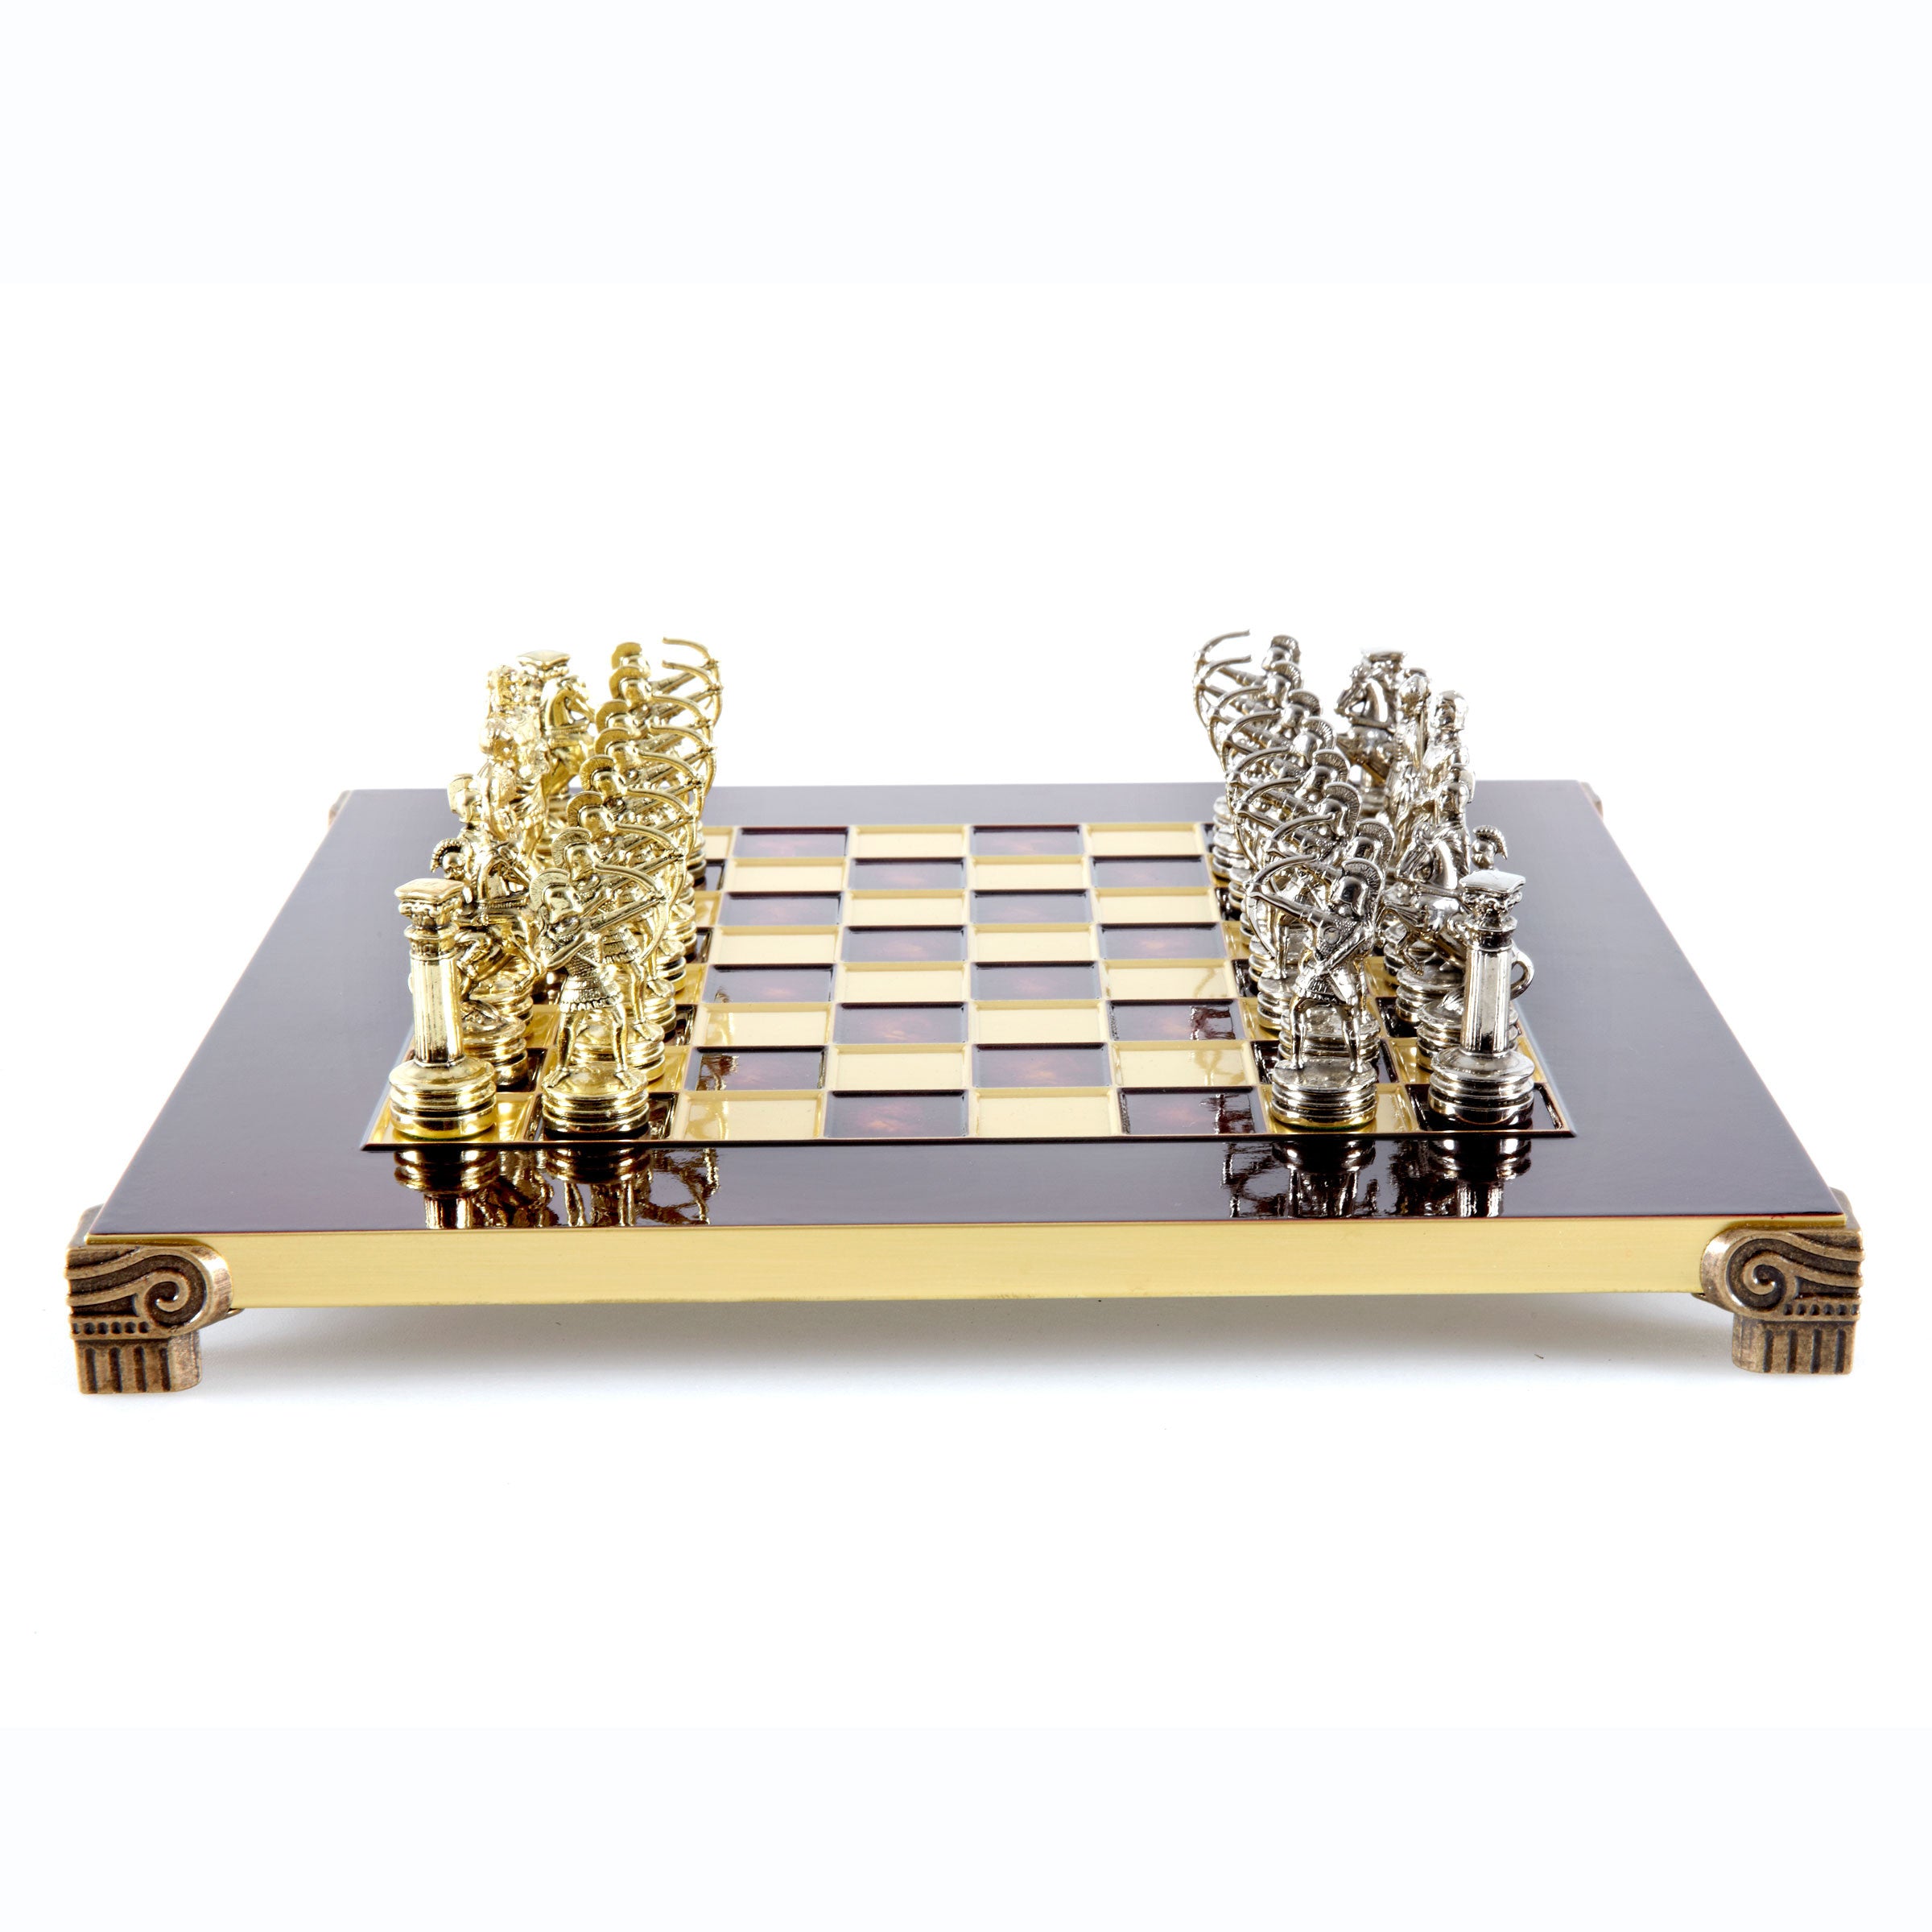 The Manopoulos Archers Luxury Chess Set with Wooden Case [S10RED] - $230.00  - Regency Chess - Finest Quality Chess Sets, Boards & Pieces